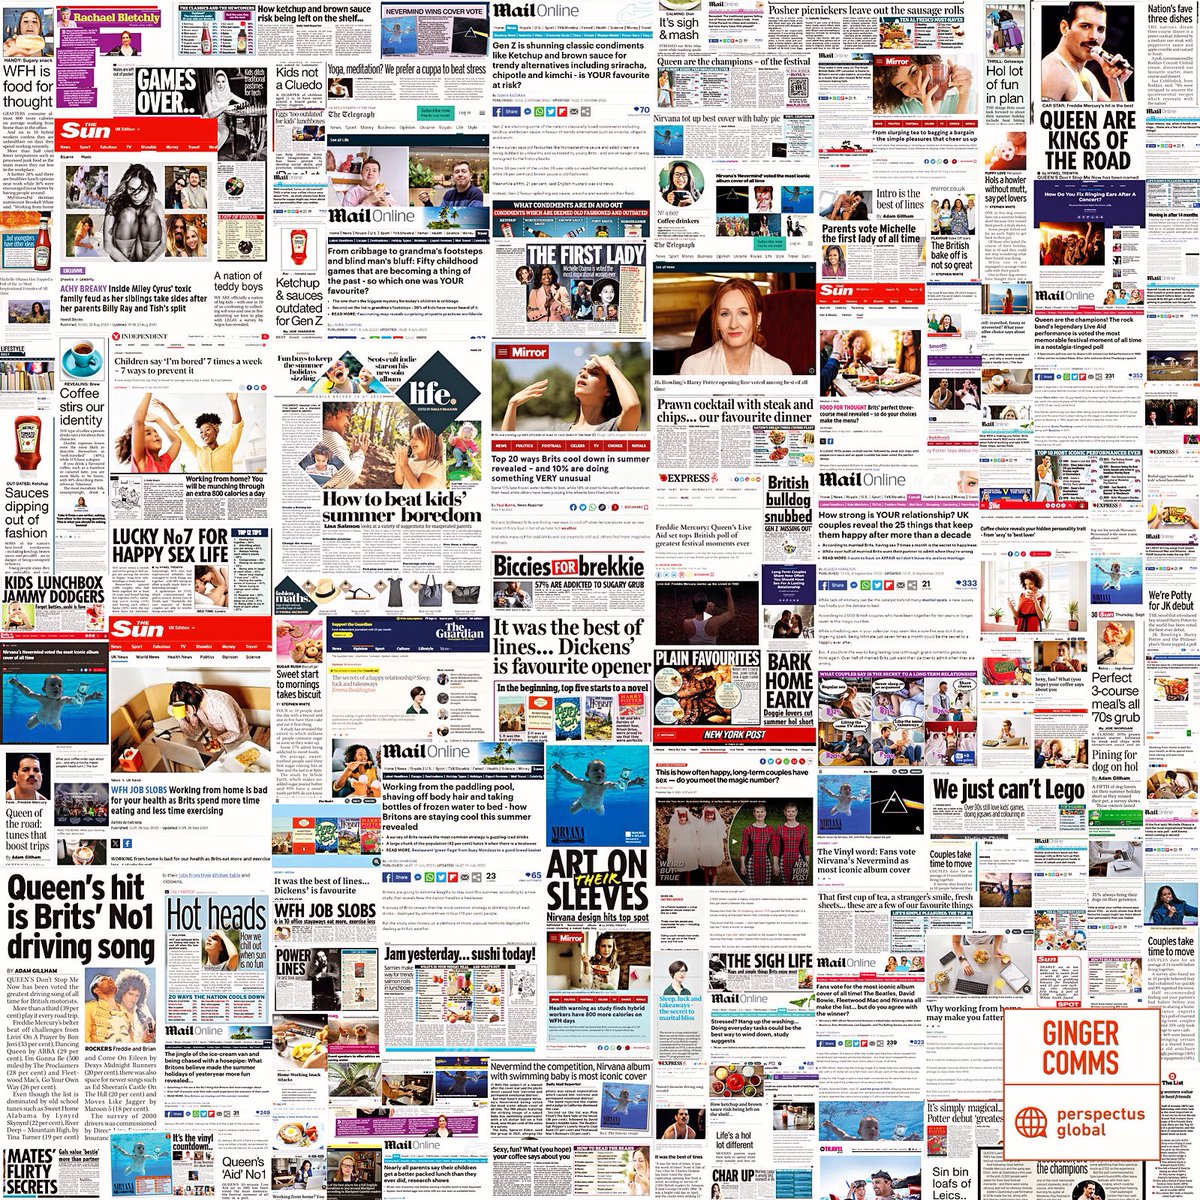 Latest coverage haul.. working with many of the UK’s biggest brands and PR agencies. 

The team have been absolutely killing it! 

All our coverage is 💯 fully earned. 

#earnedmedia #news #Editorial #brandedcontent